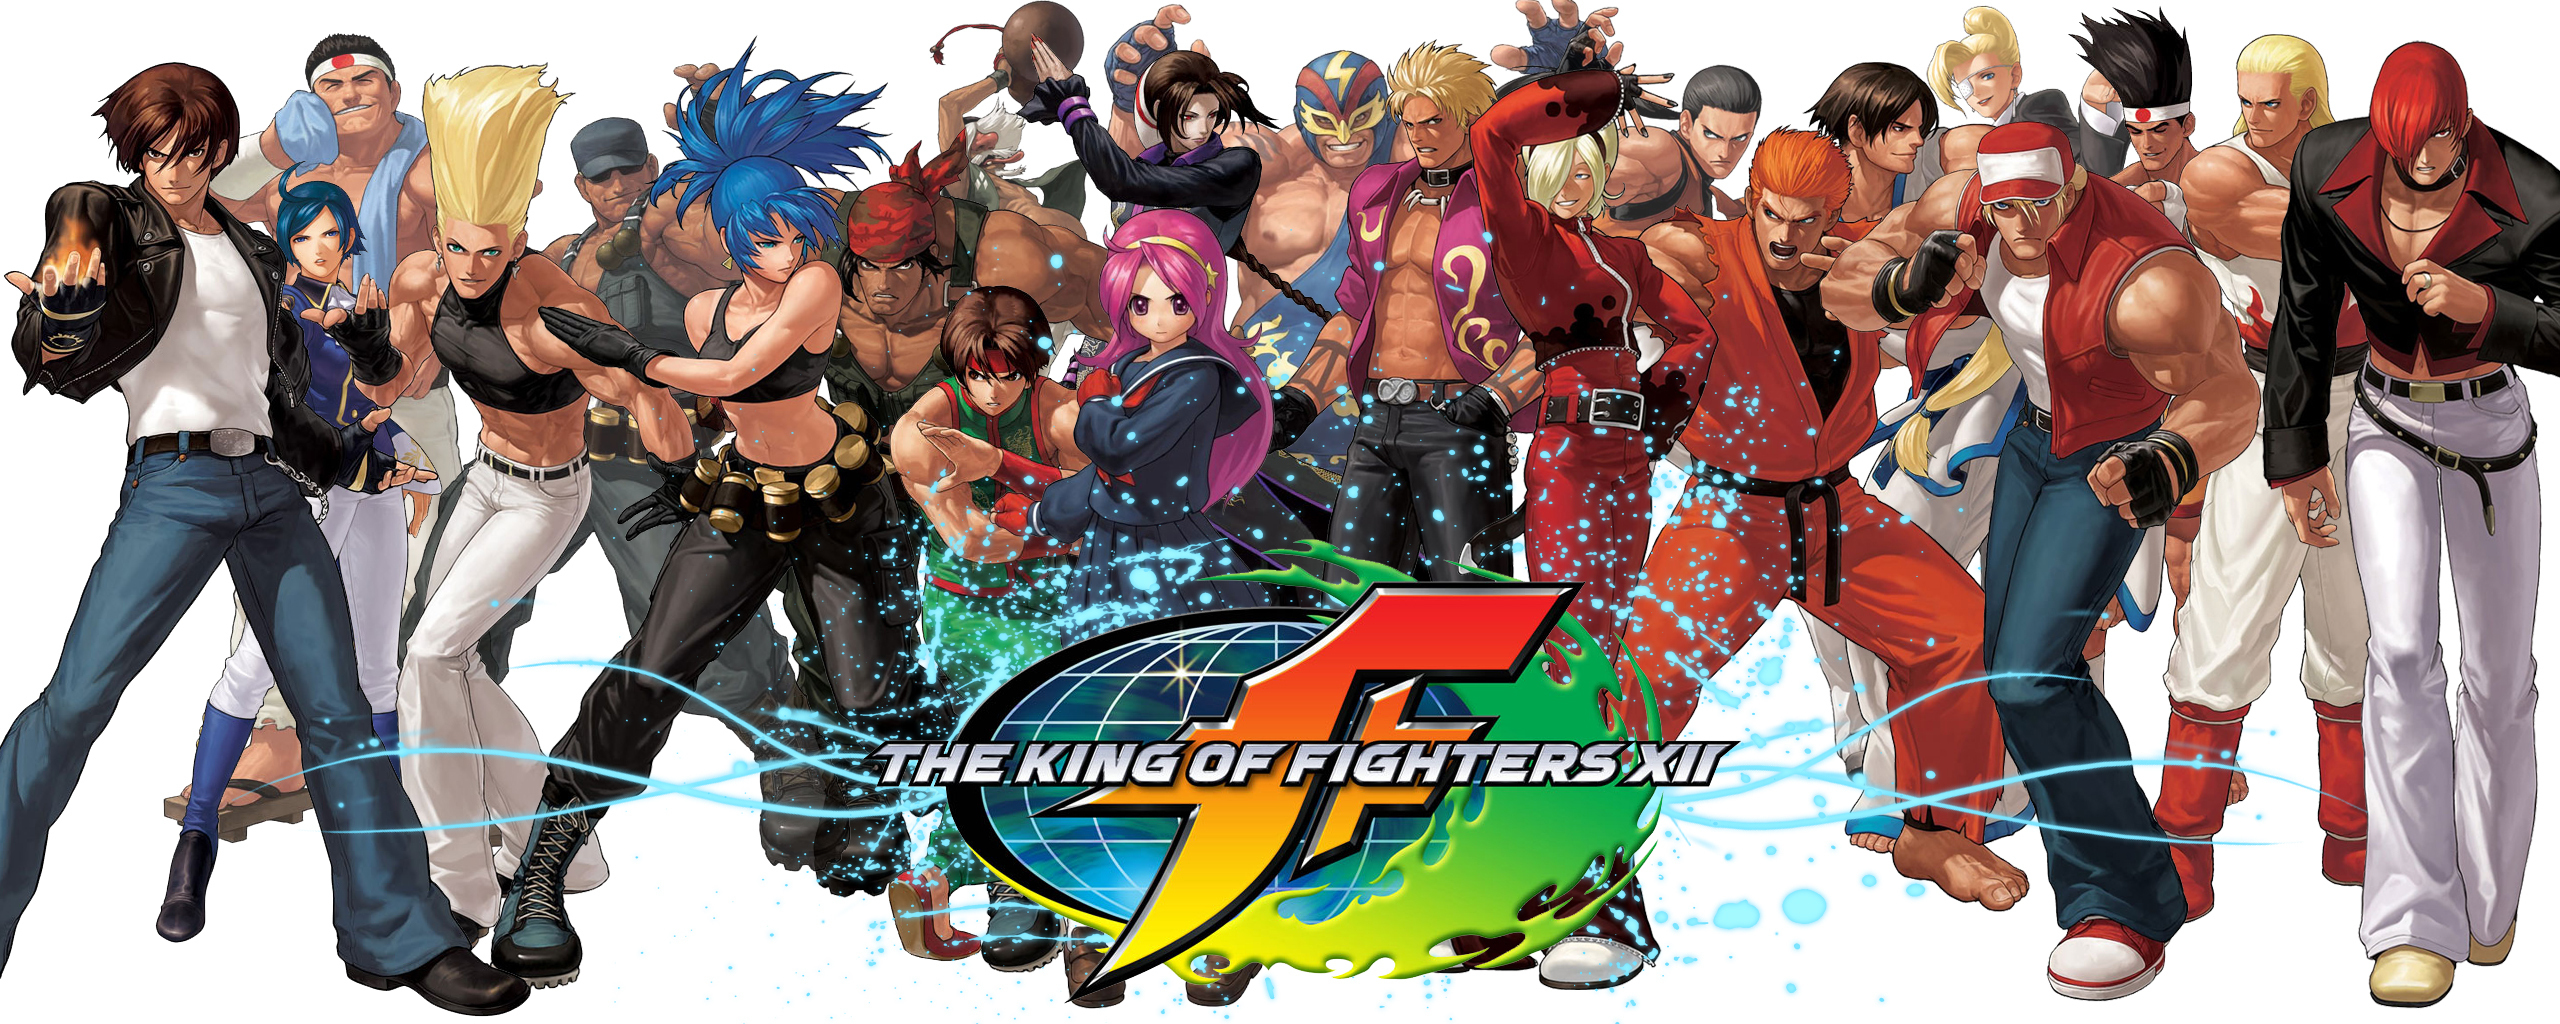 Download Latest HD Wallpapers of , Games, Kings Of Fighters.